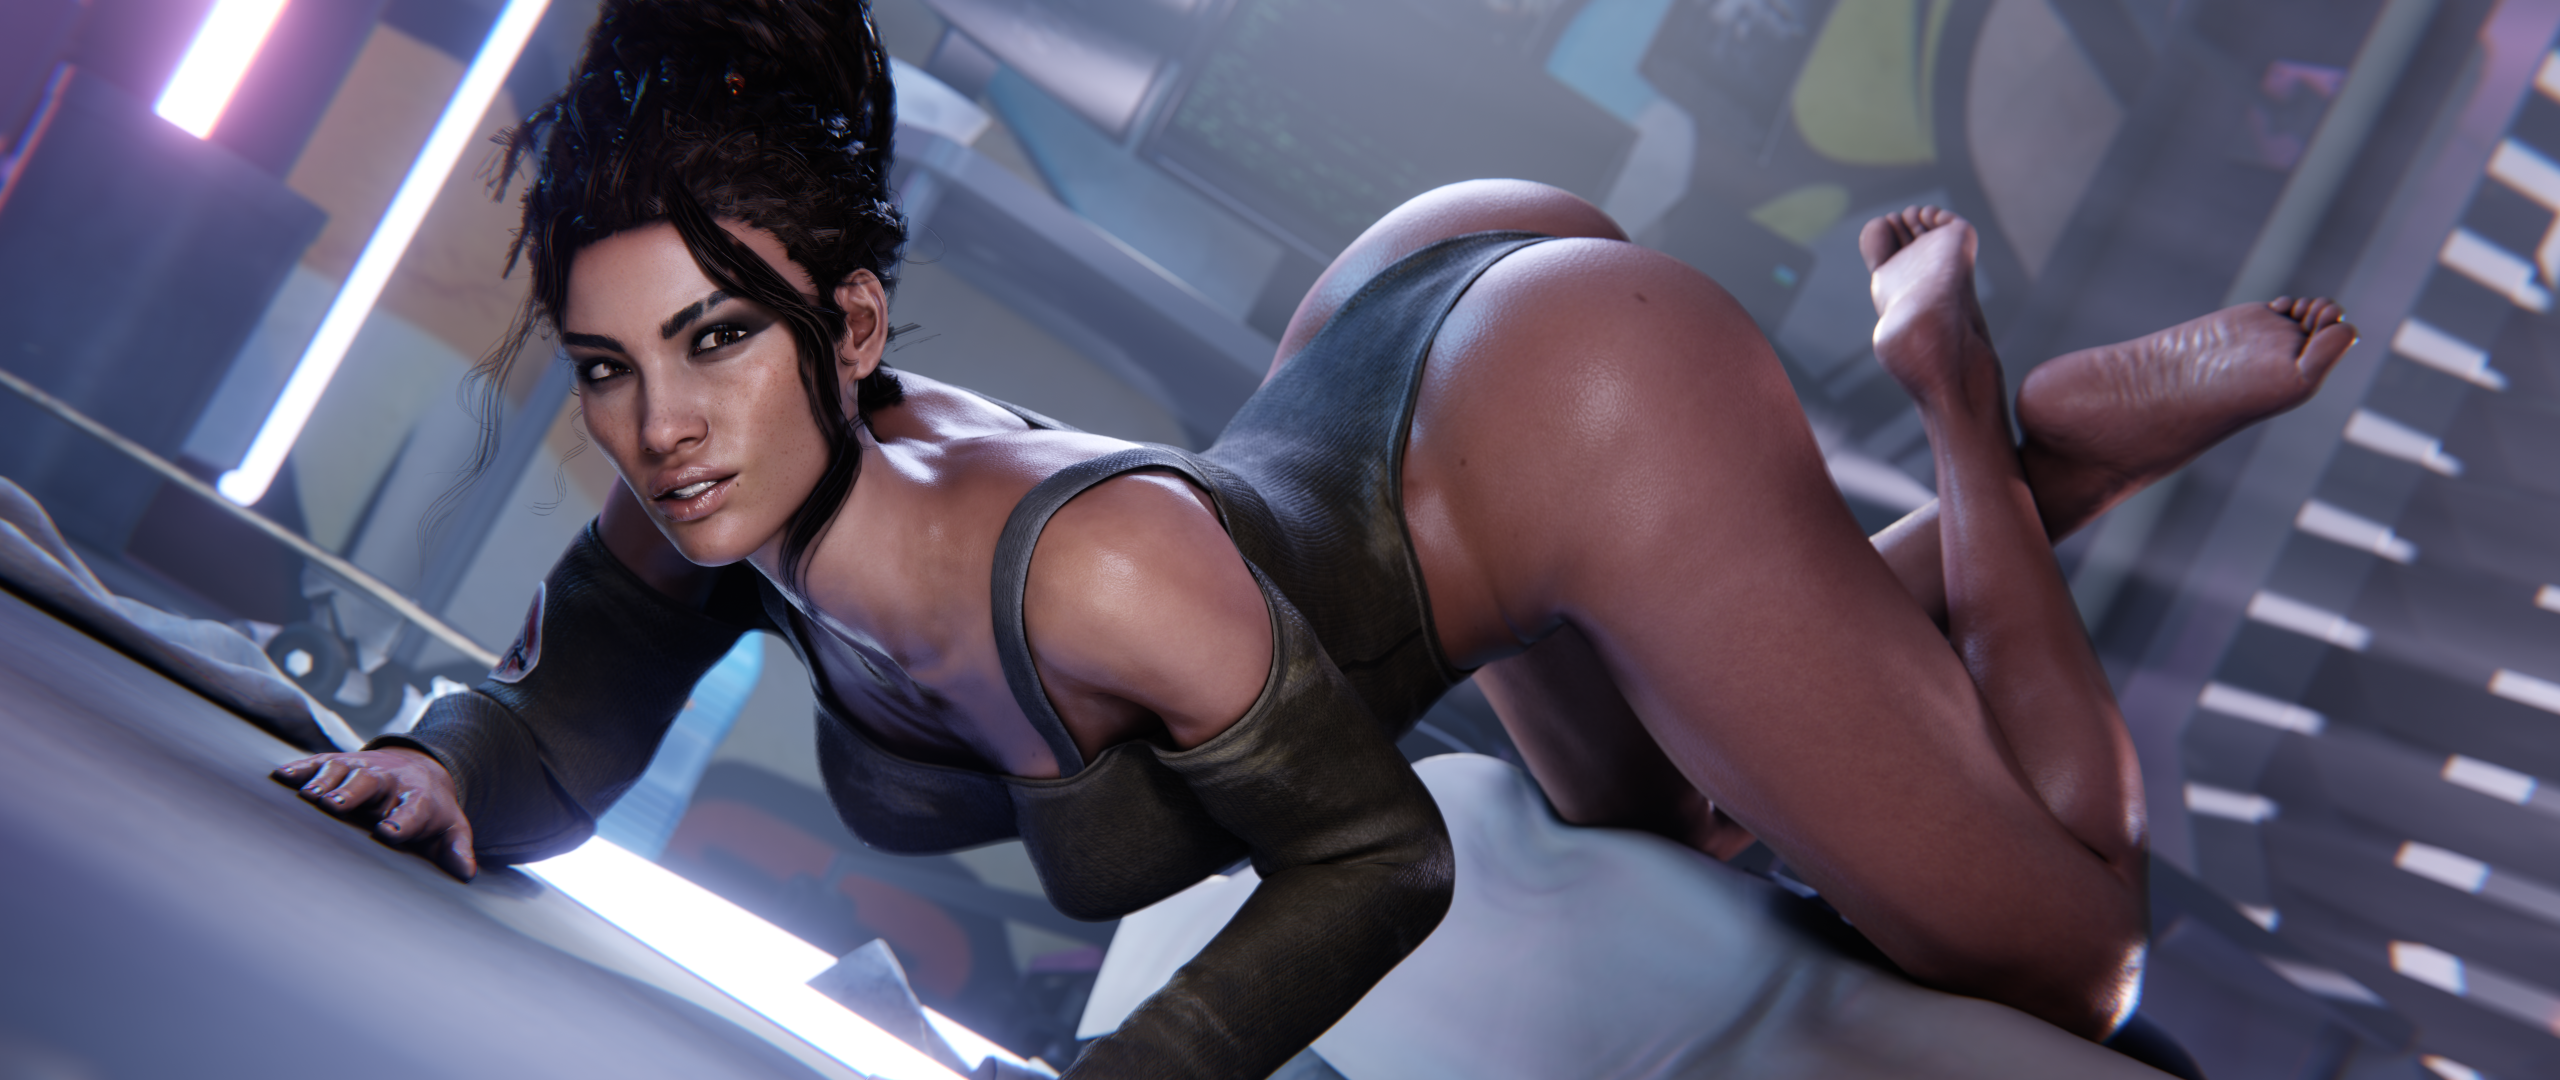 General 2560x1080 CGI video game girls ass video games bent over looking at viewer video game characters feet crossed Panam Palmer Strauzek (artist) foot sole Cyberpunk 2077 feet